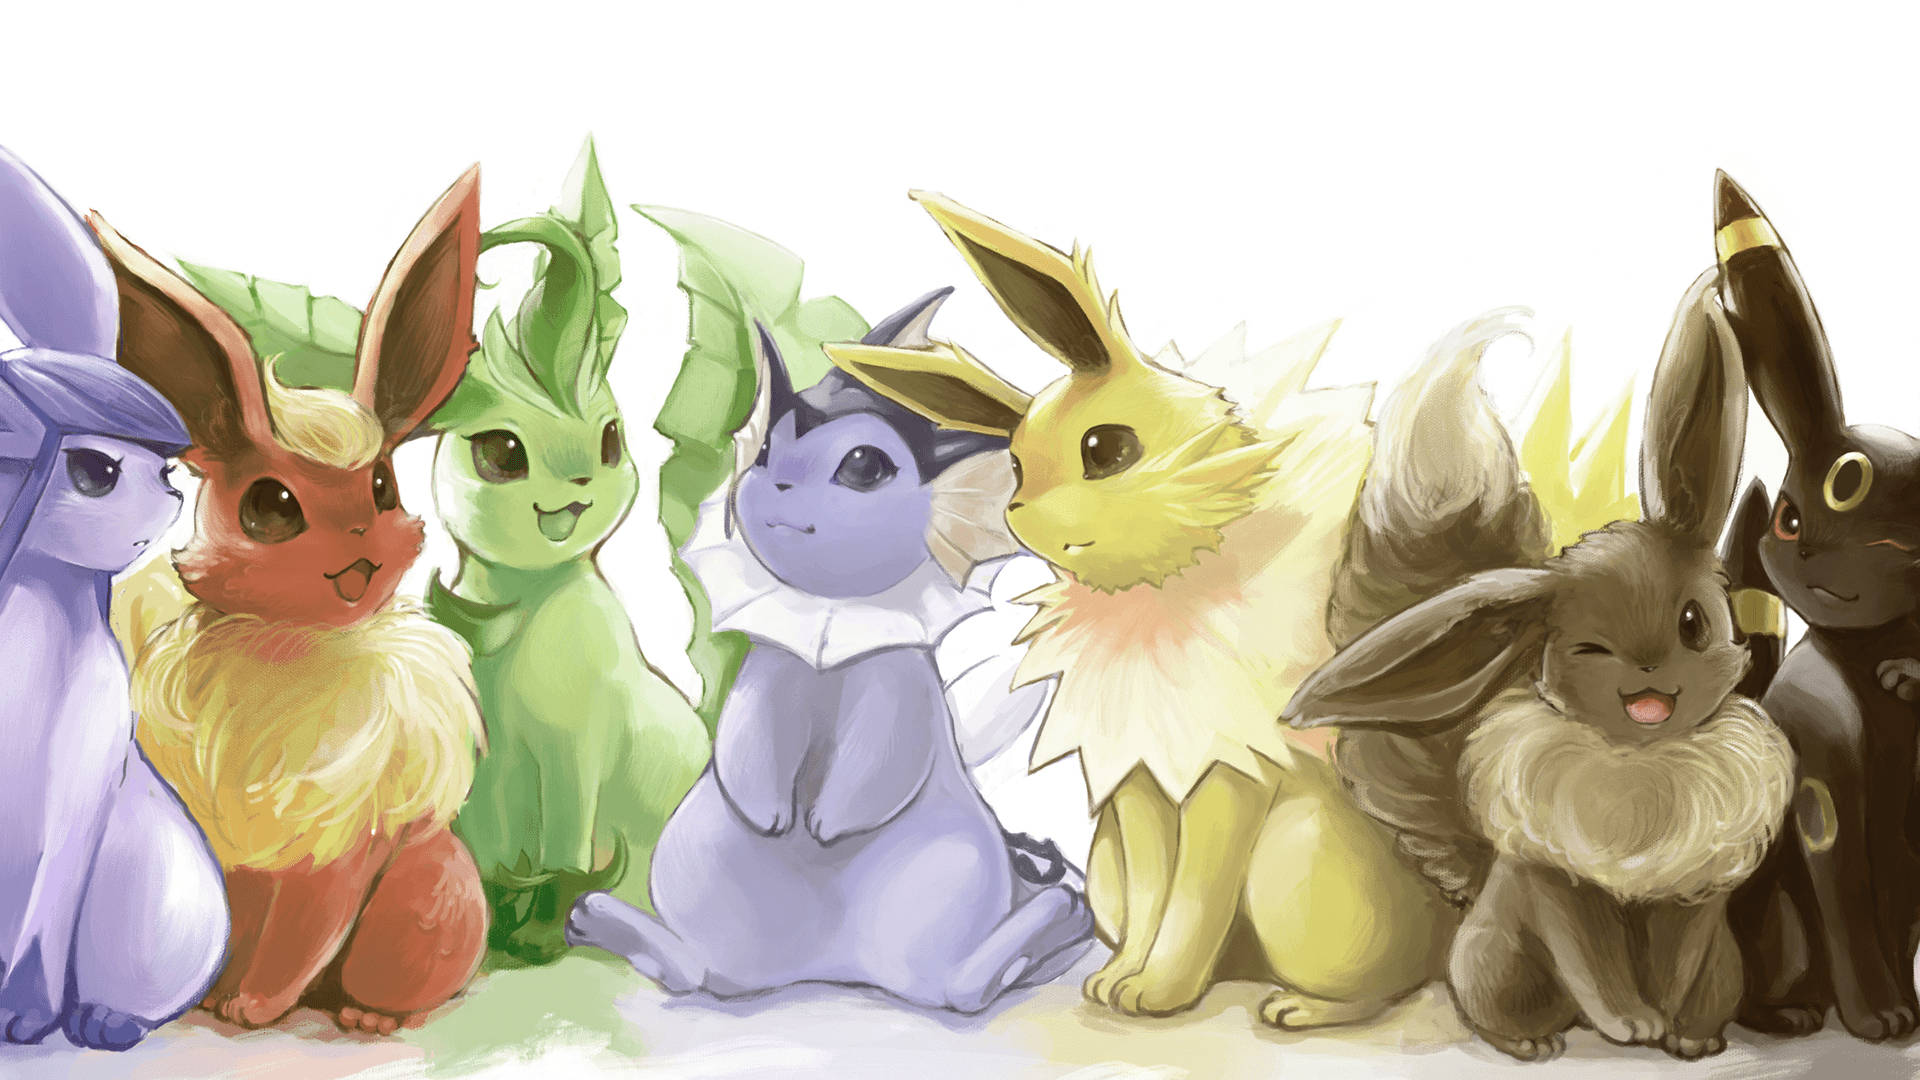 Awesome Illustration Of Flareon With Other Pokemon Wallpaper